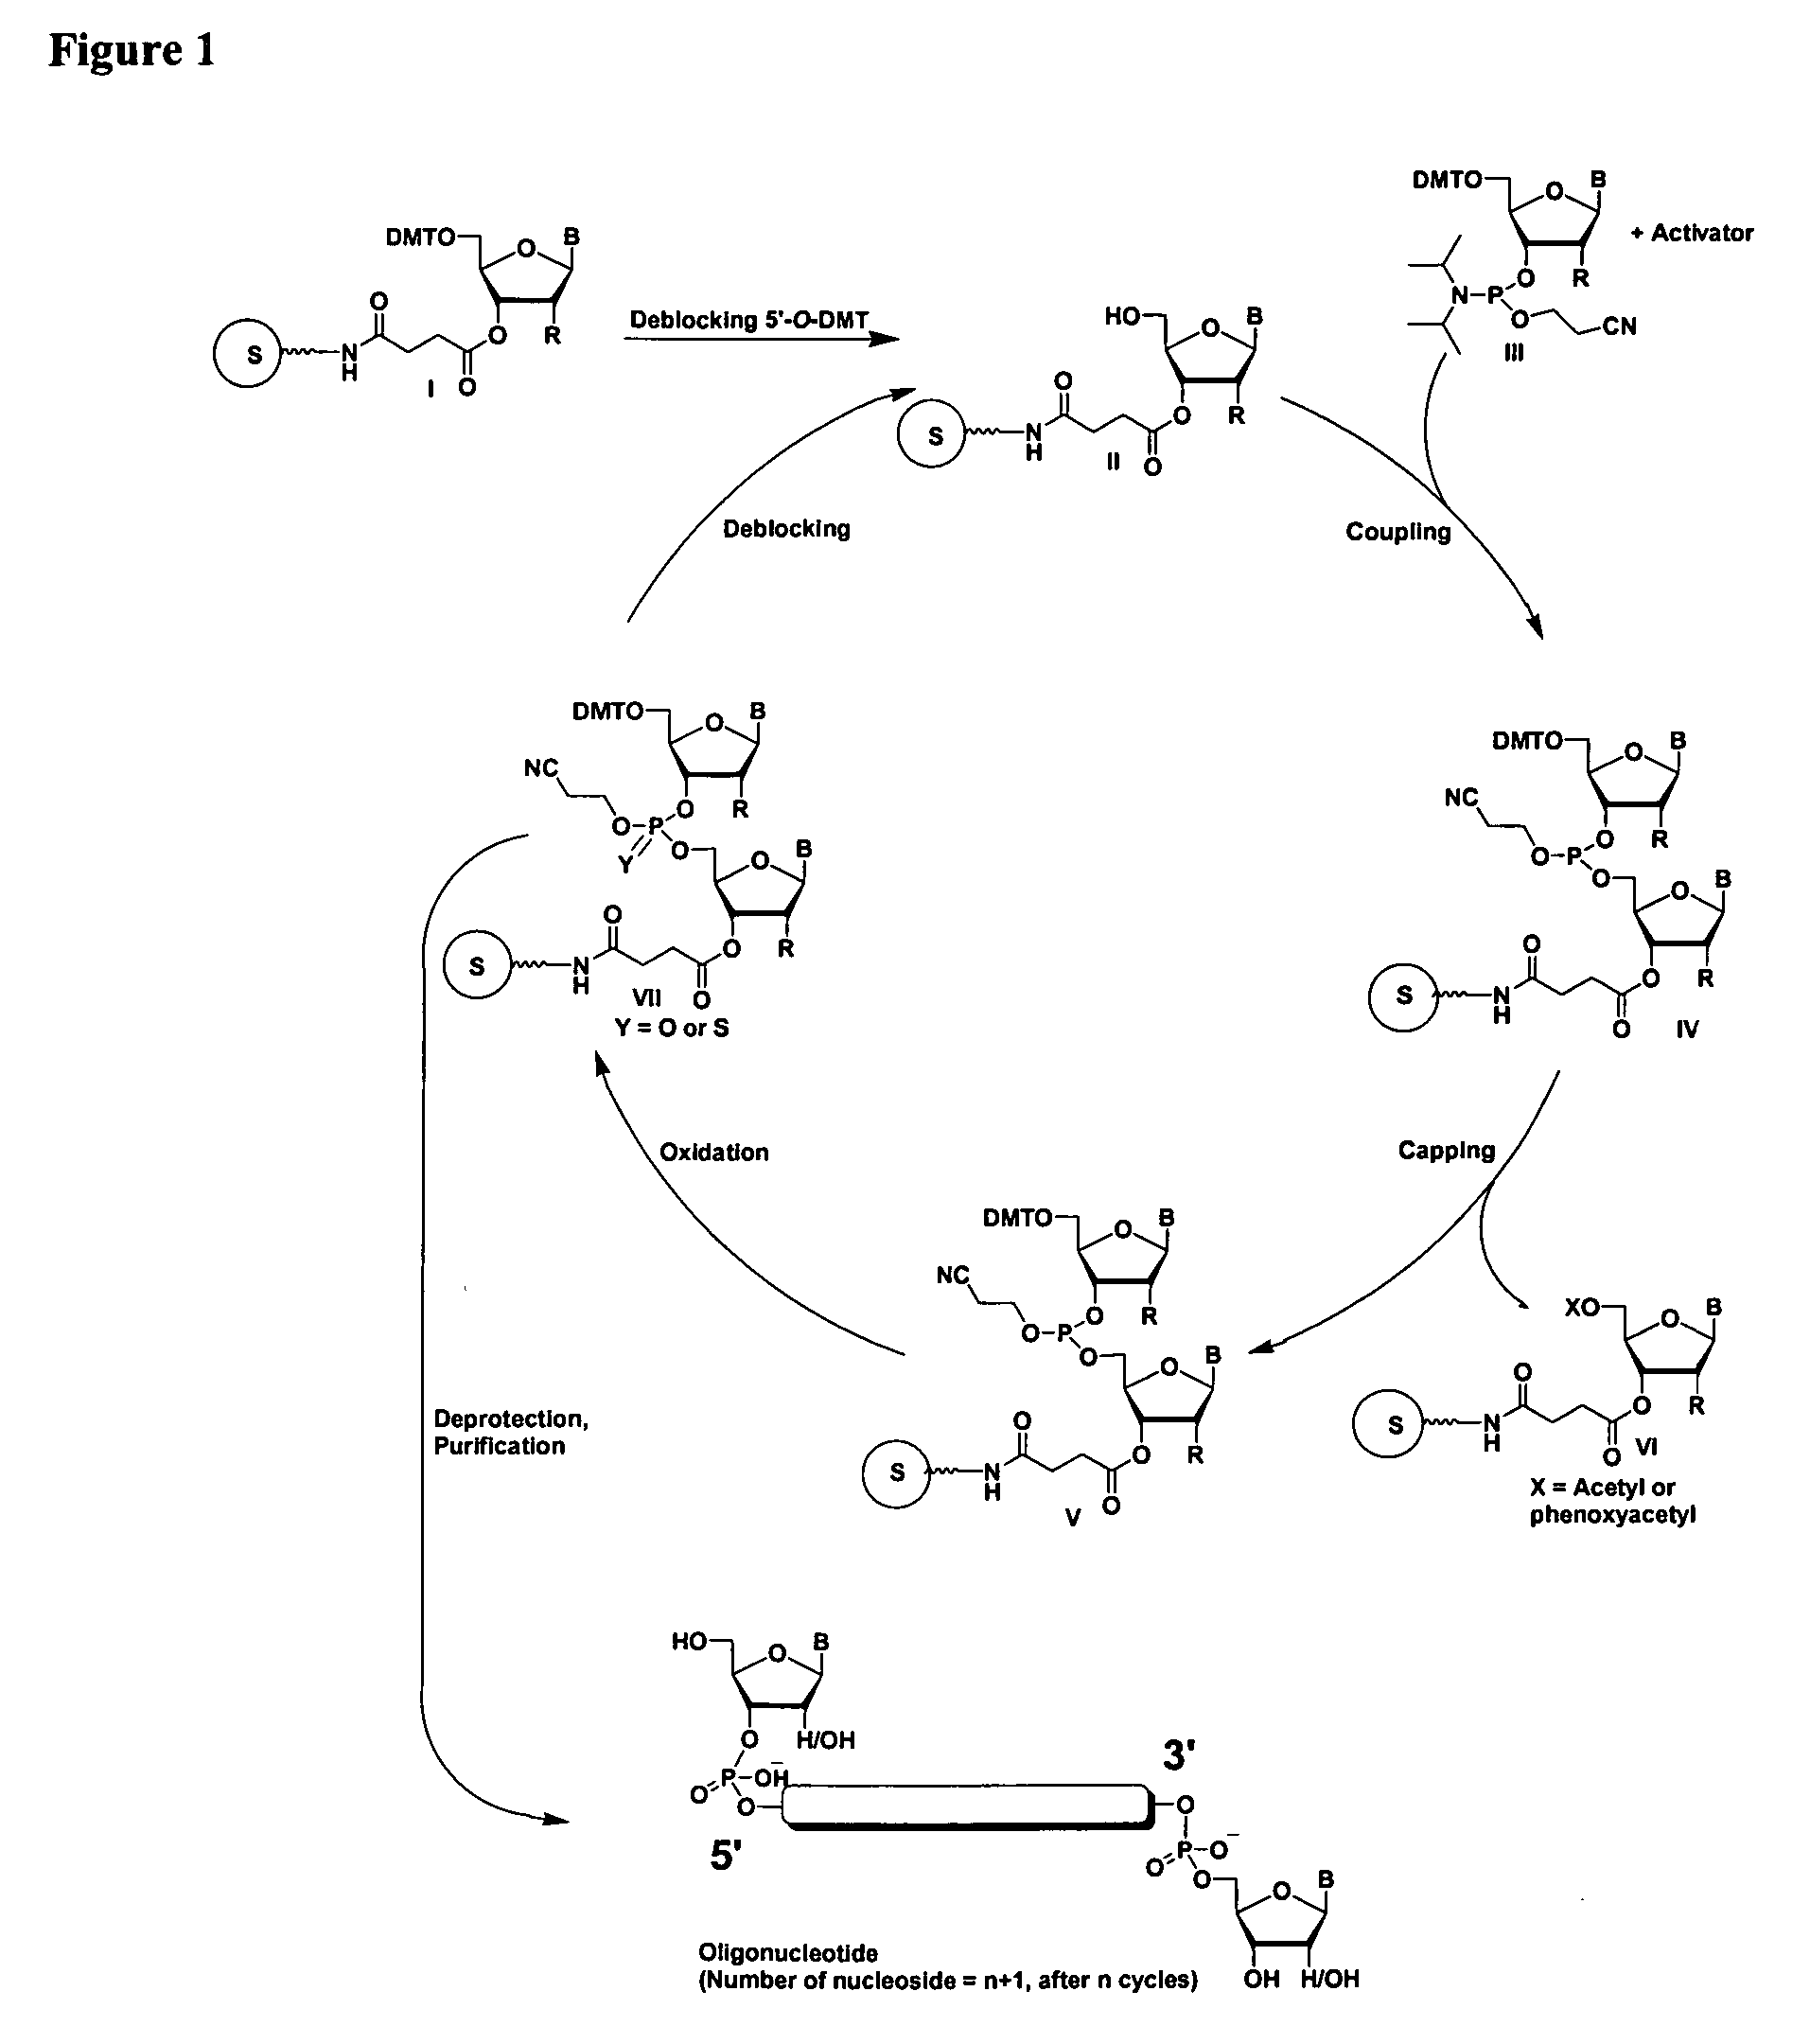 Oligonucleotides comprising a ligand tethered to a modified or non-natural nucleobase